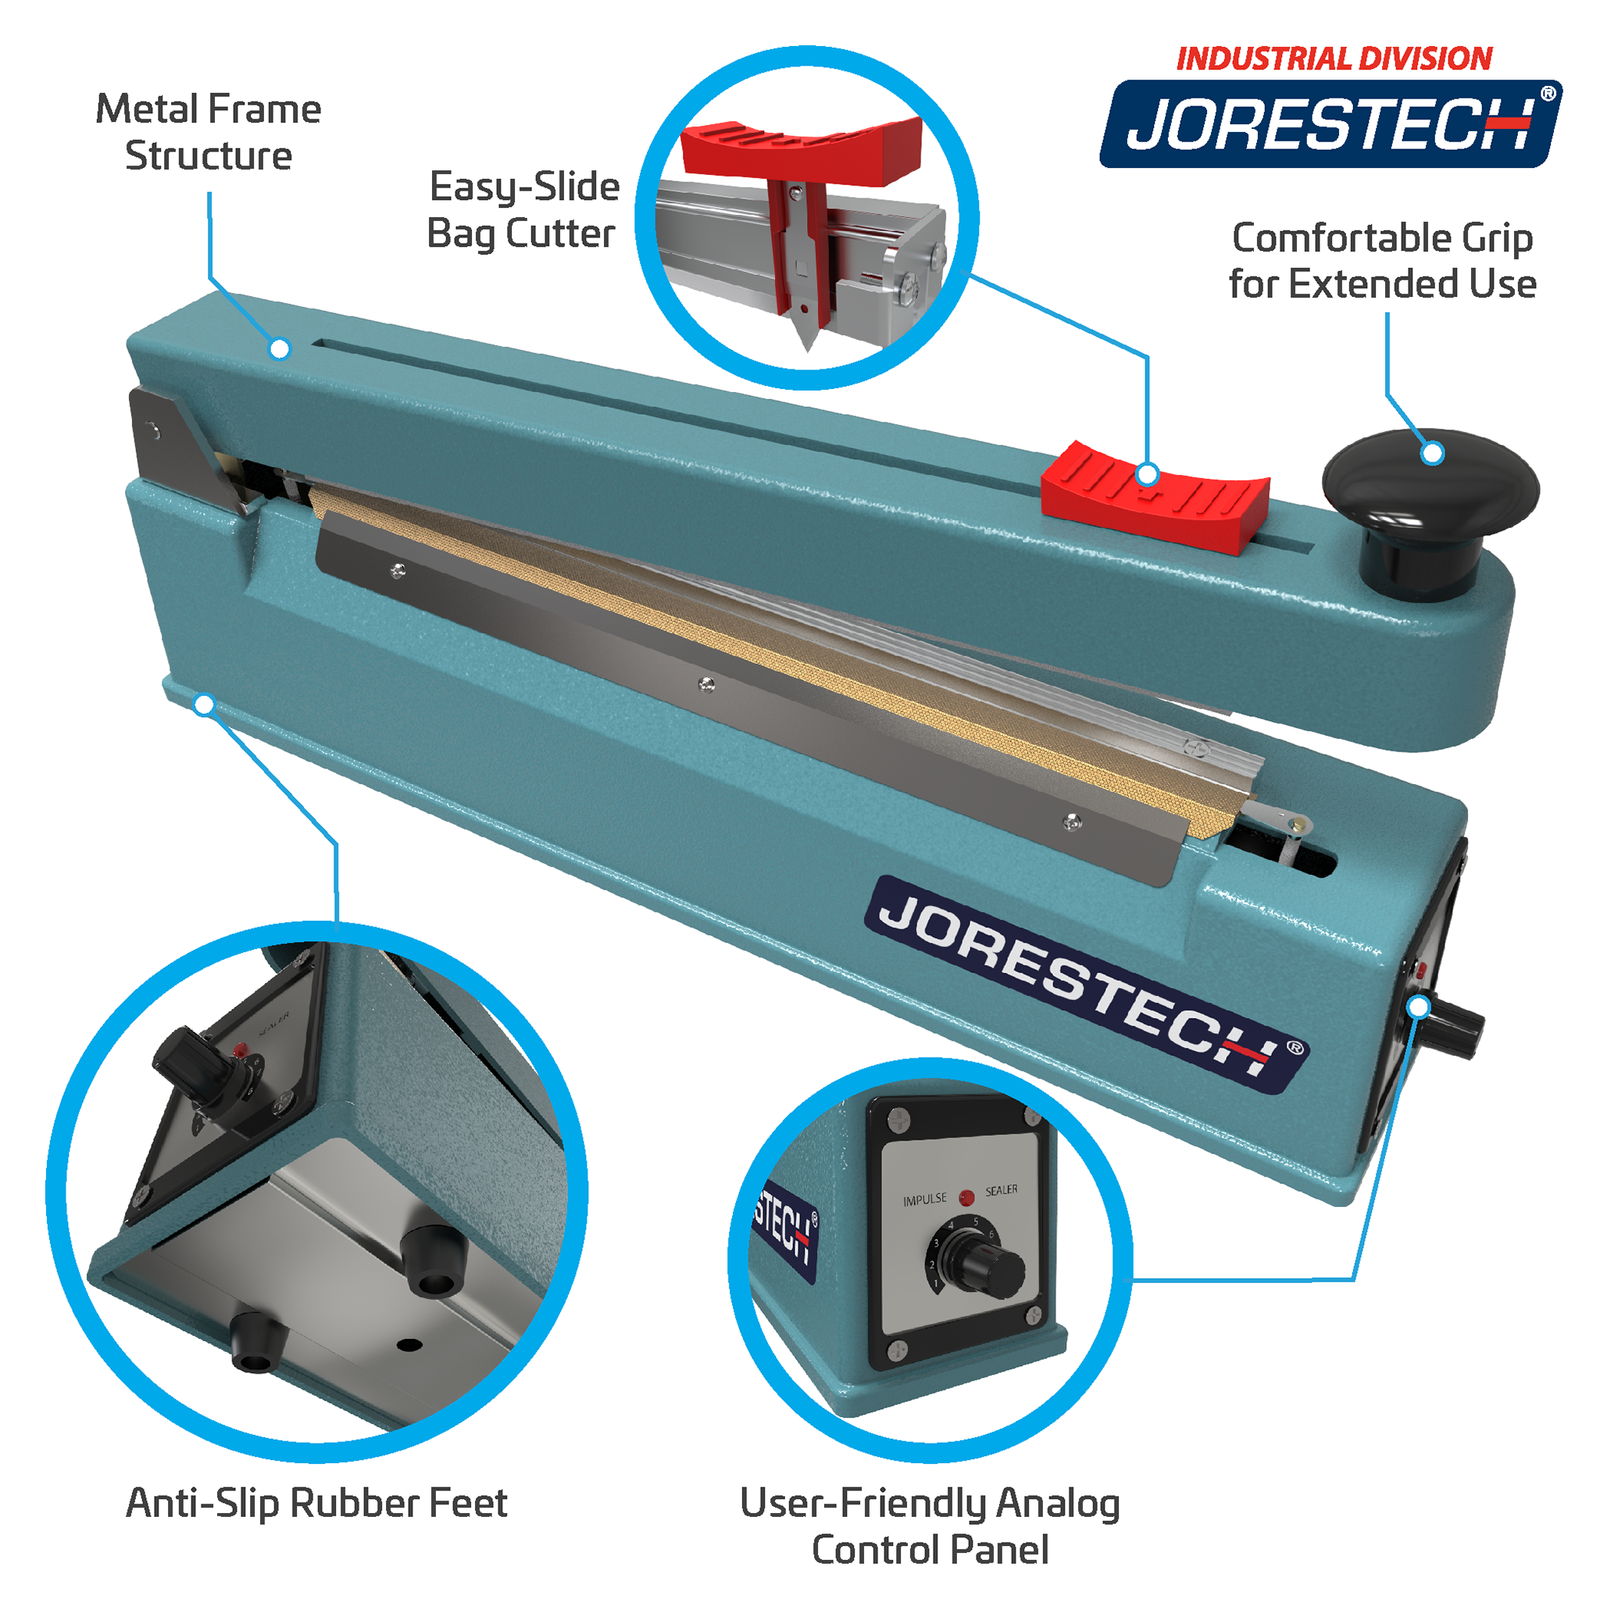 Infographic of 12 blue manual impulse sealer. Highlighted features include, Metal Frame Structure, Easy-slide bag cutter, Comfortable Grip for Extended Use, Anti-slip Rubber Feet, and User Friendly Analog Control Panel. Zoomed images show close-ups of rubber feet and control panel.